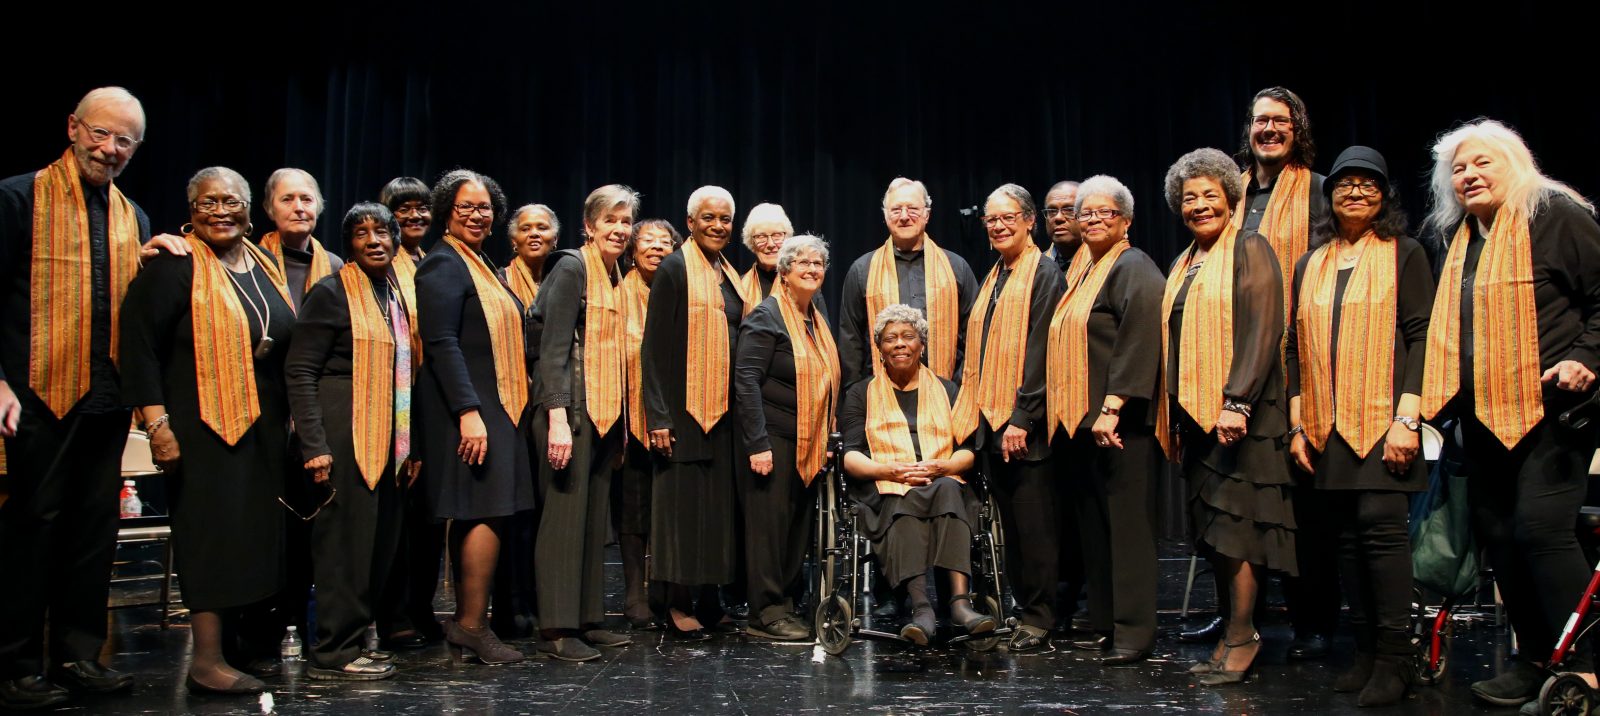 Image of Sabathani Vintage Voices Singers, photo credit: Kyndell Harkness